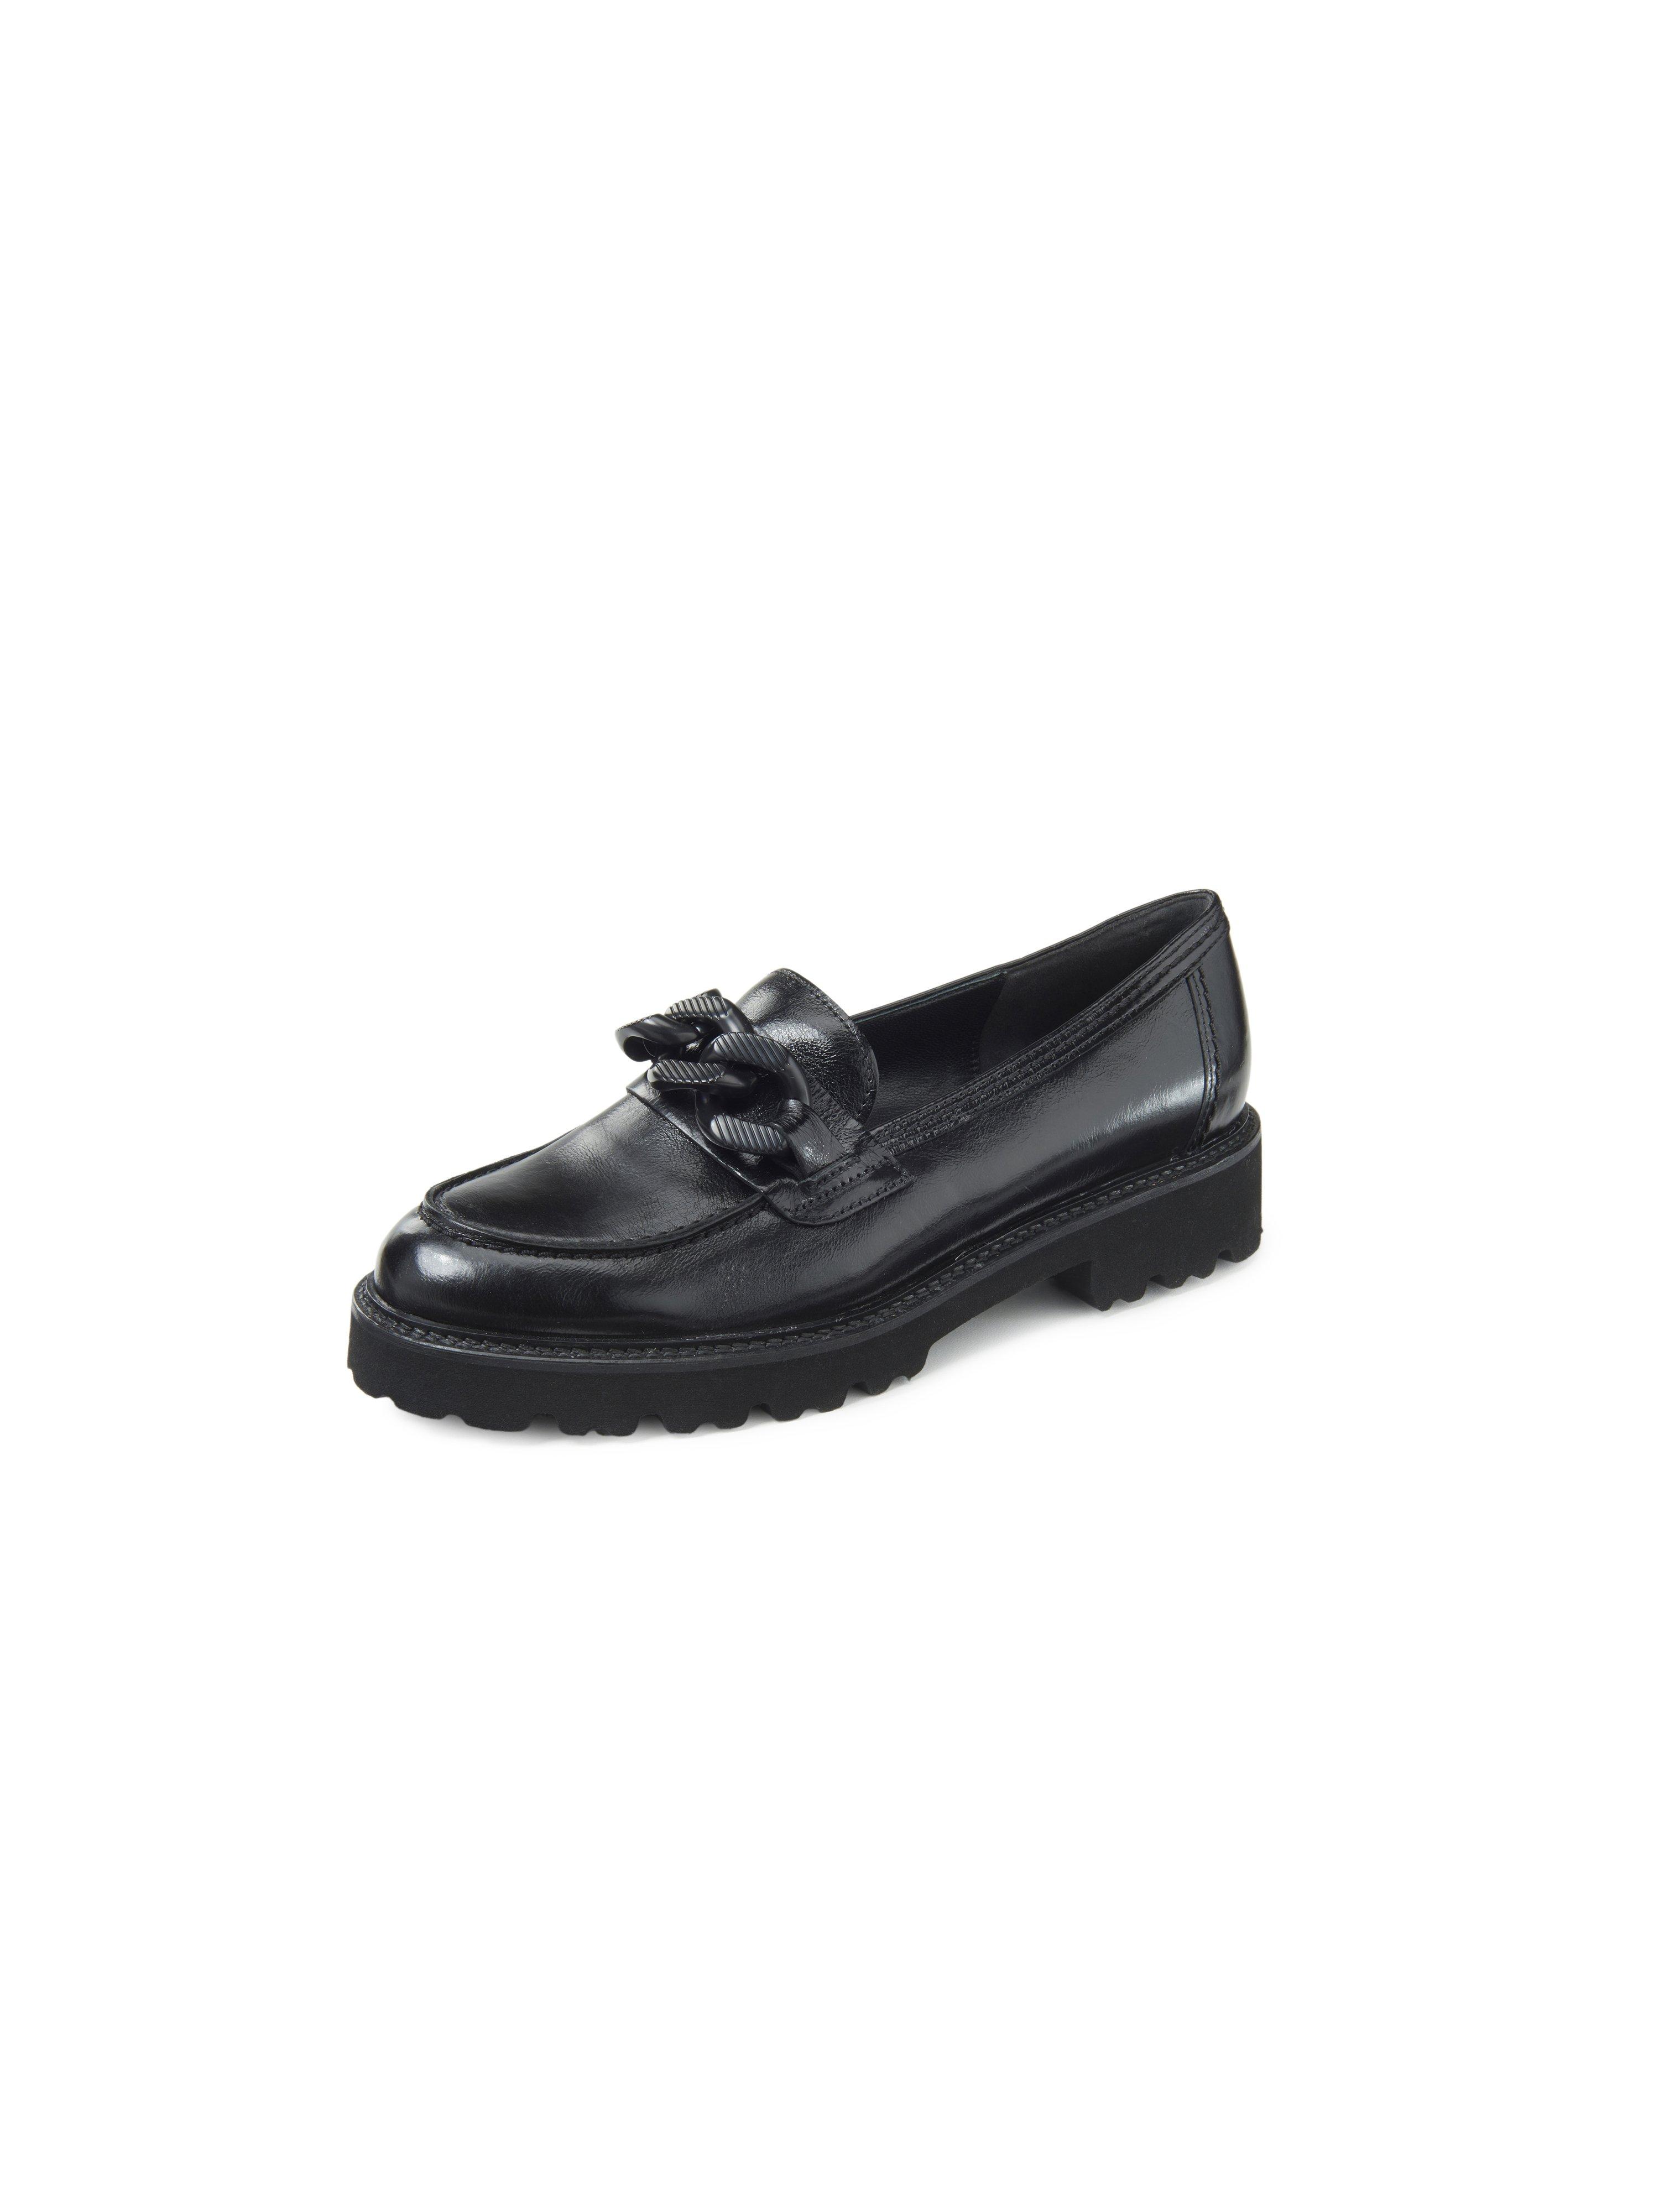 Bloemlezing diepvries effect Gabor - Loafers in patent leather -